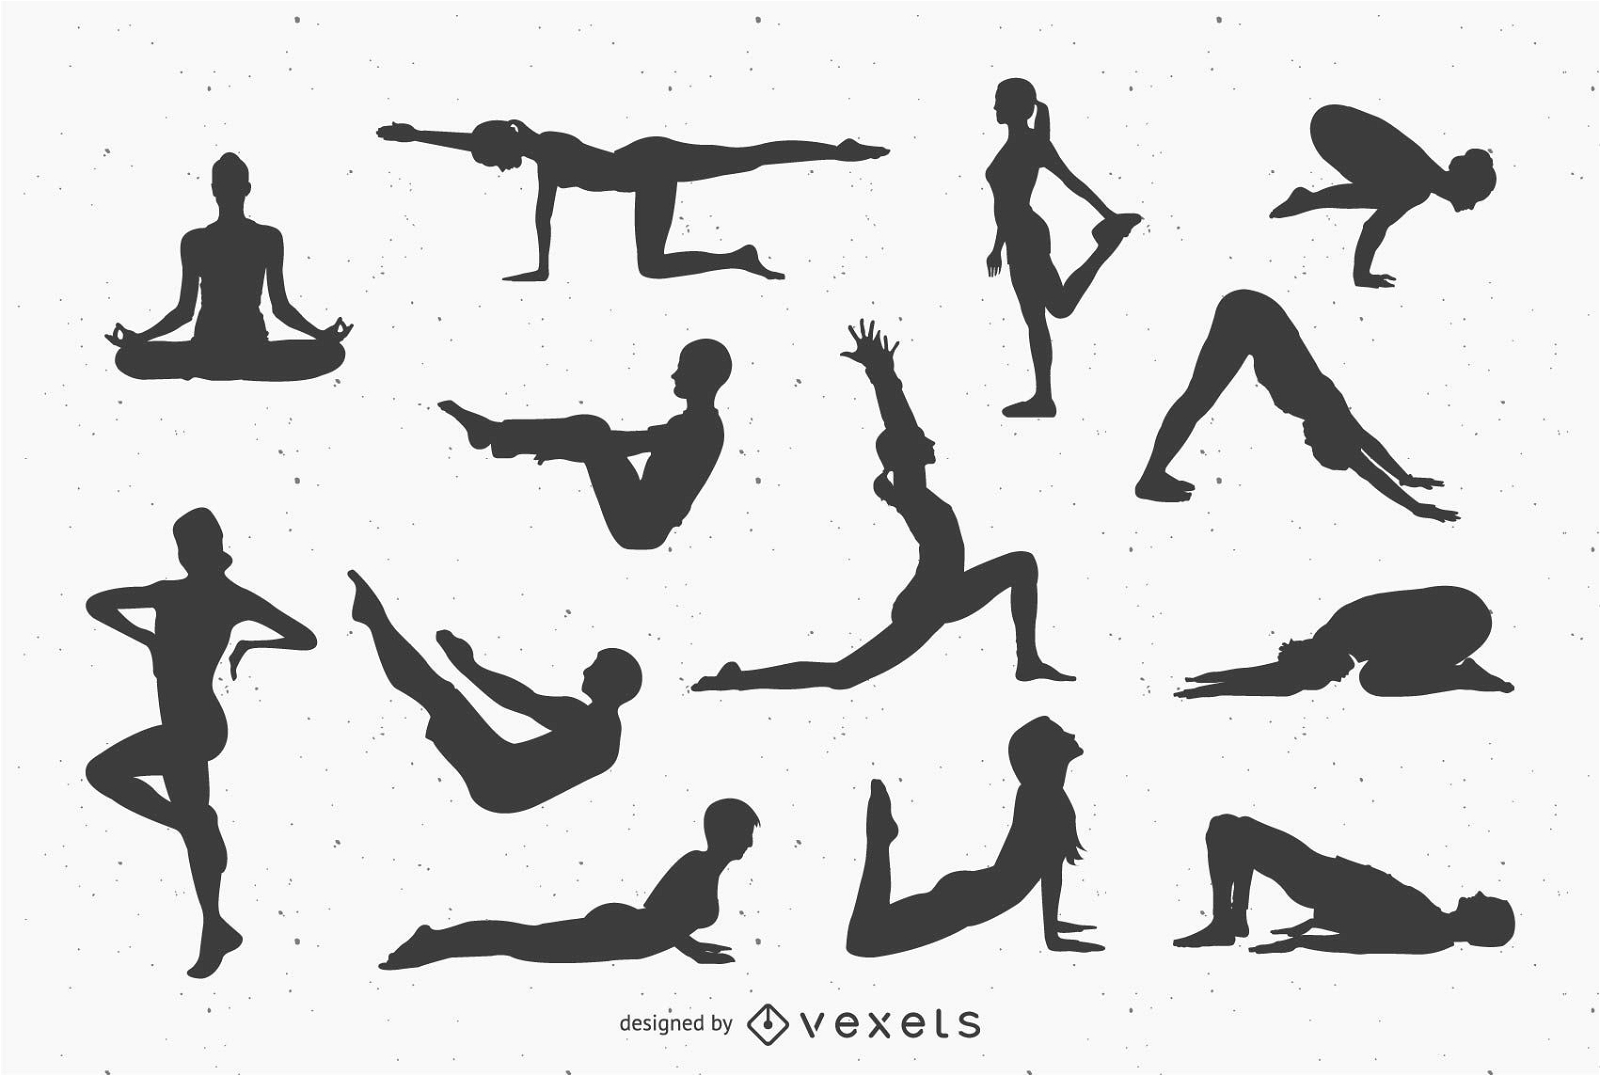 Yoga Silhoutte vector Poses